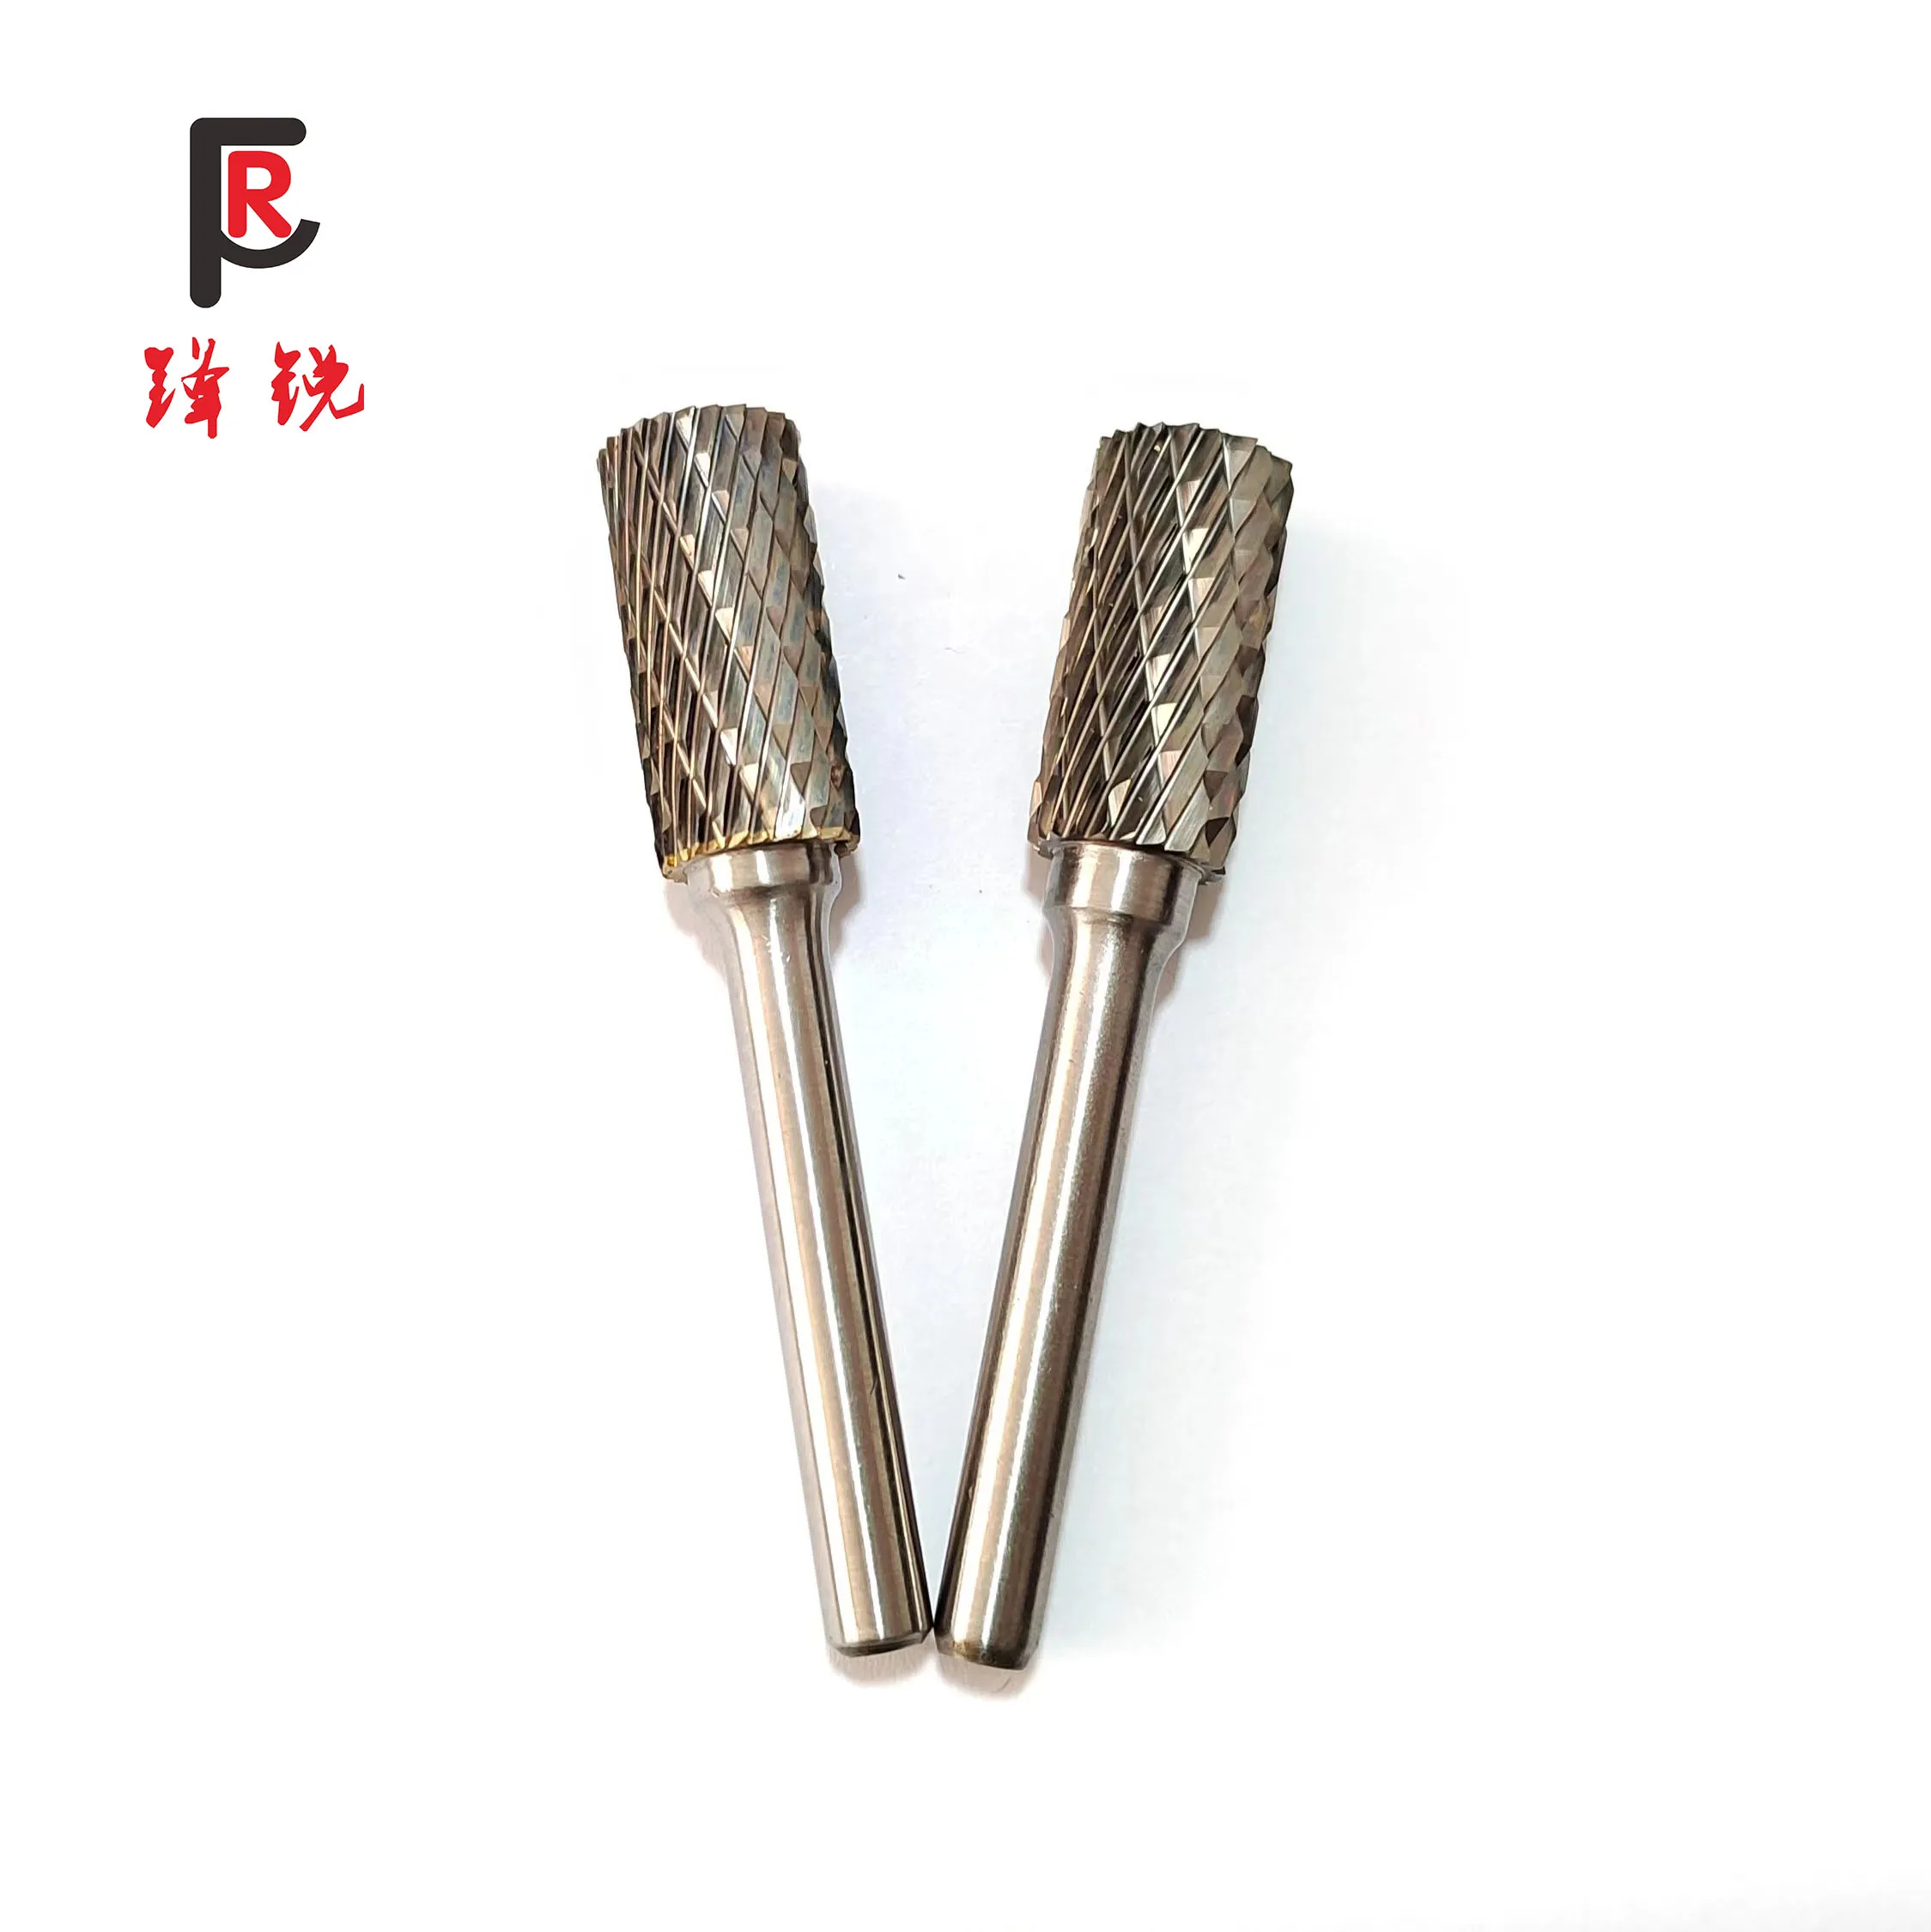 A1625 Factory Selling Tungsten Carbide Rotary Files Single Cut Double Cut Carbide Rotary Burrs